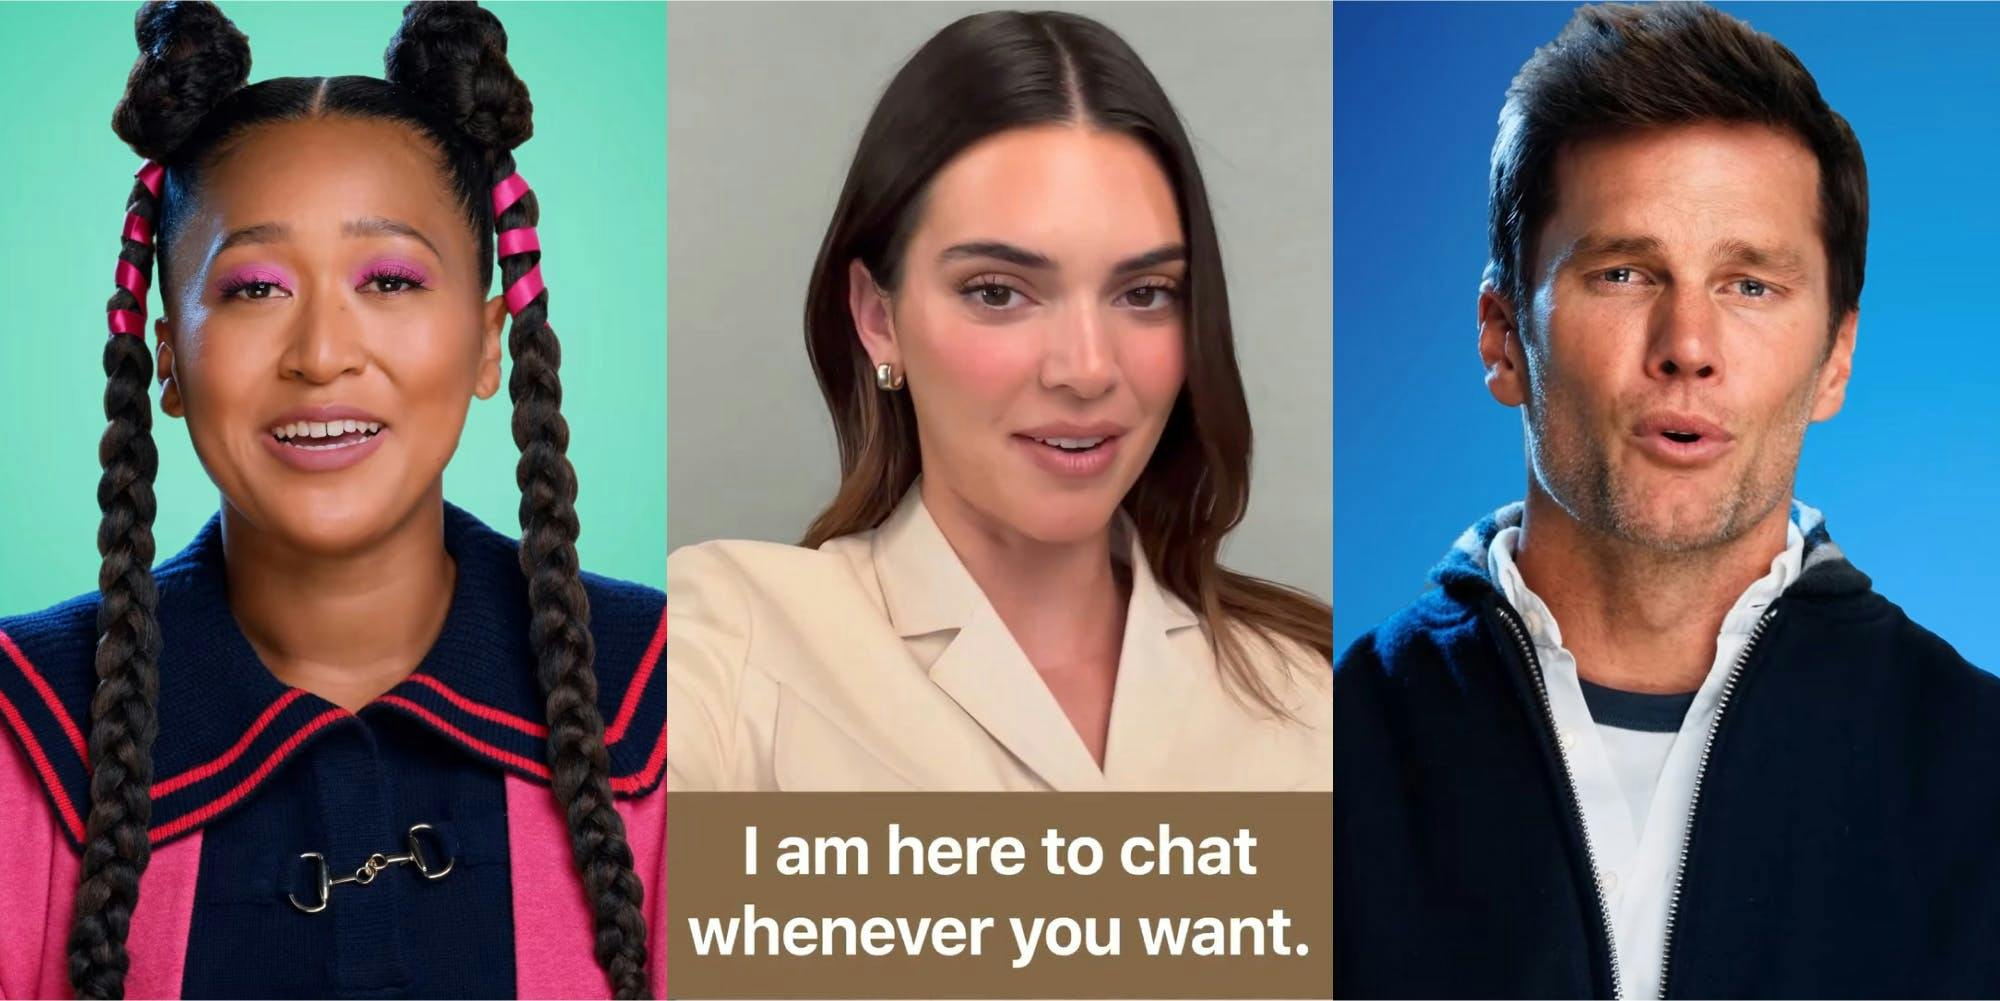 AI celebrity Naomi Osaka speaking in front of green background (l) AI celebrity Kendall Jenner speaking in front of tan background with caption "I am here to chat whenever you want" (c) AI celebrity Tom Brady speaking in front of blue background (r)